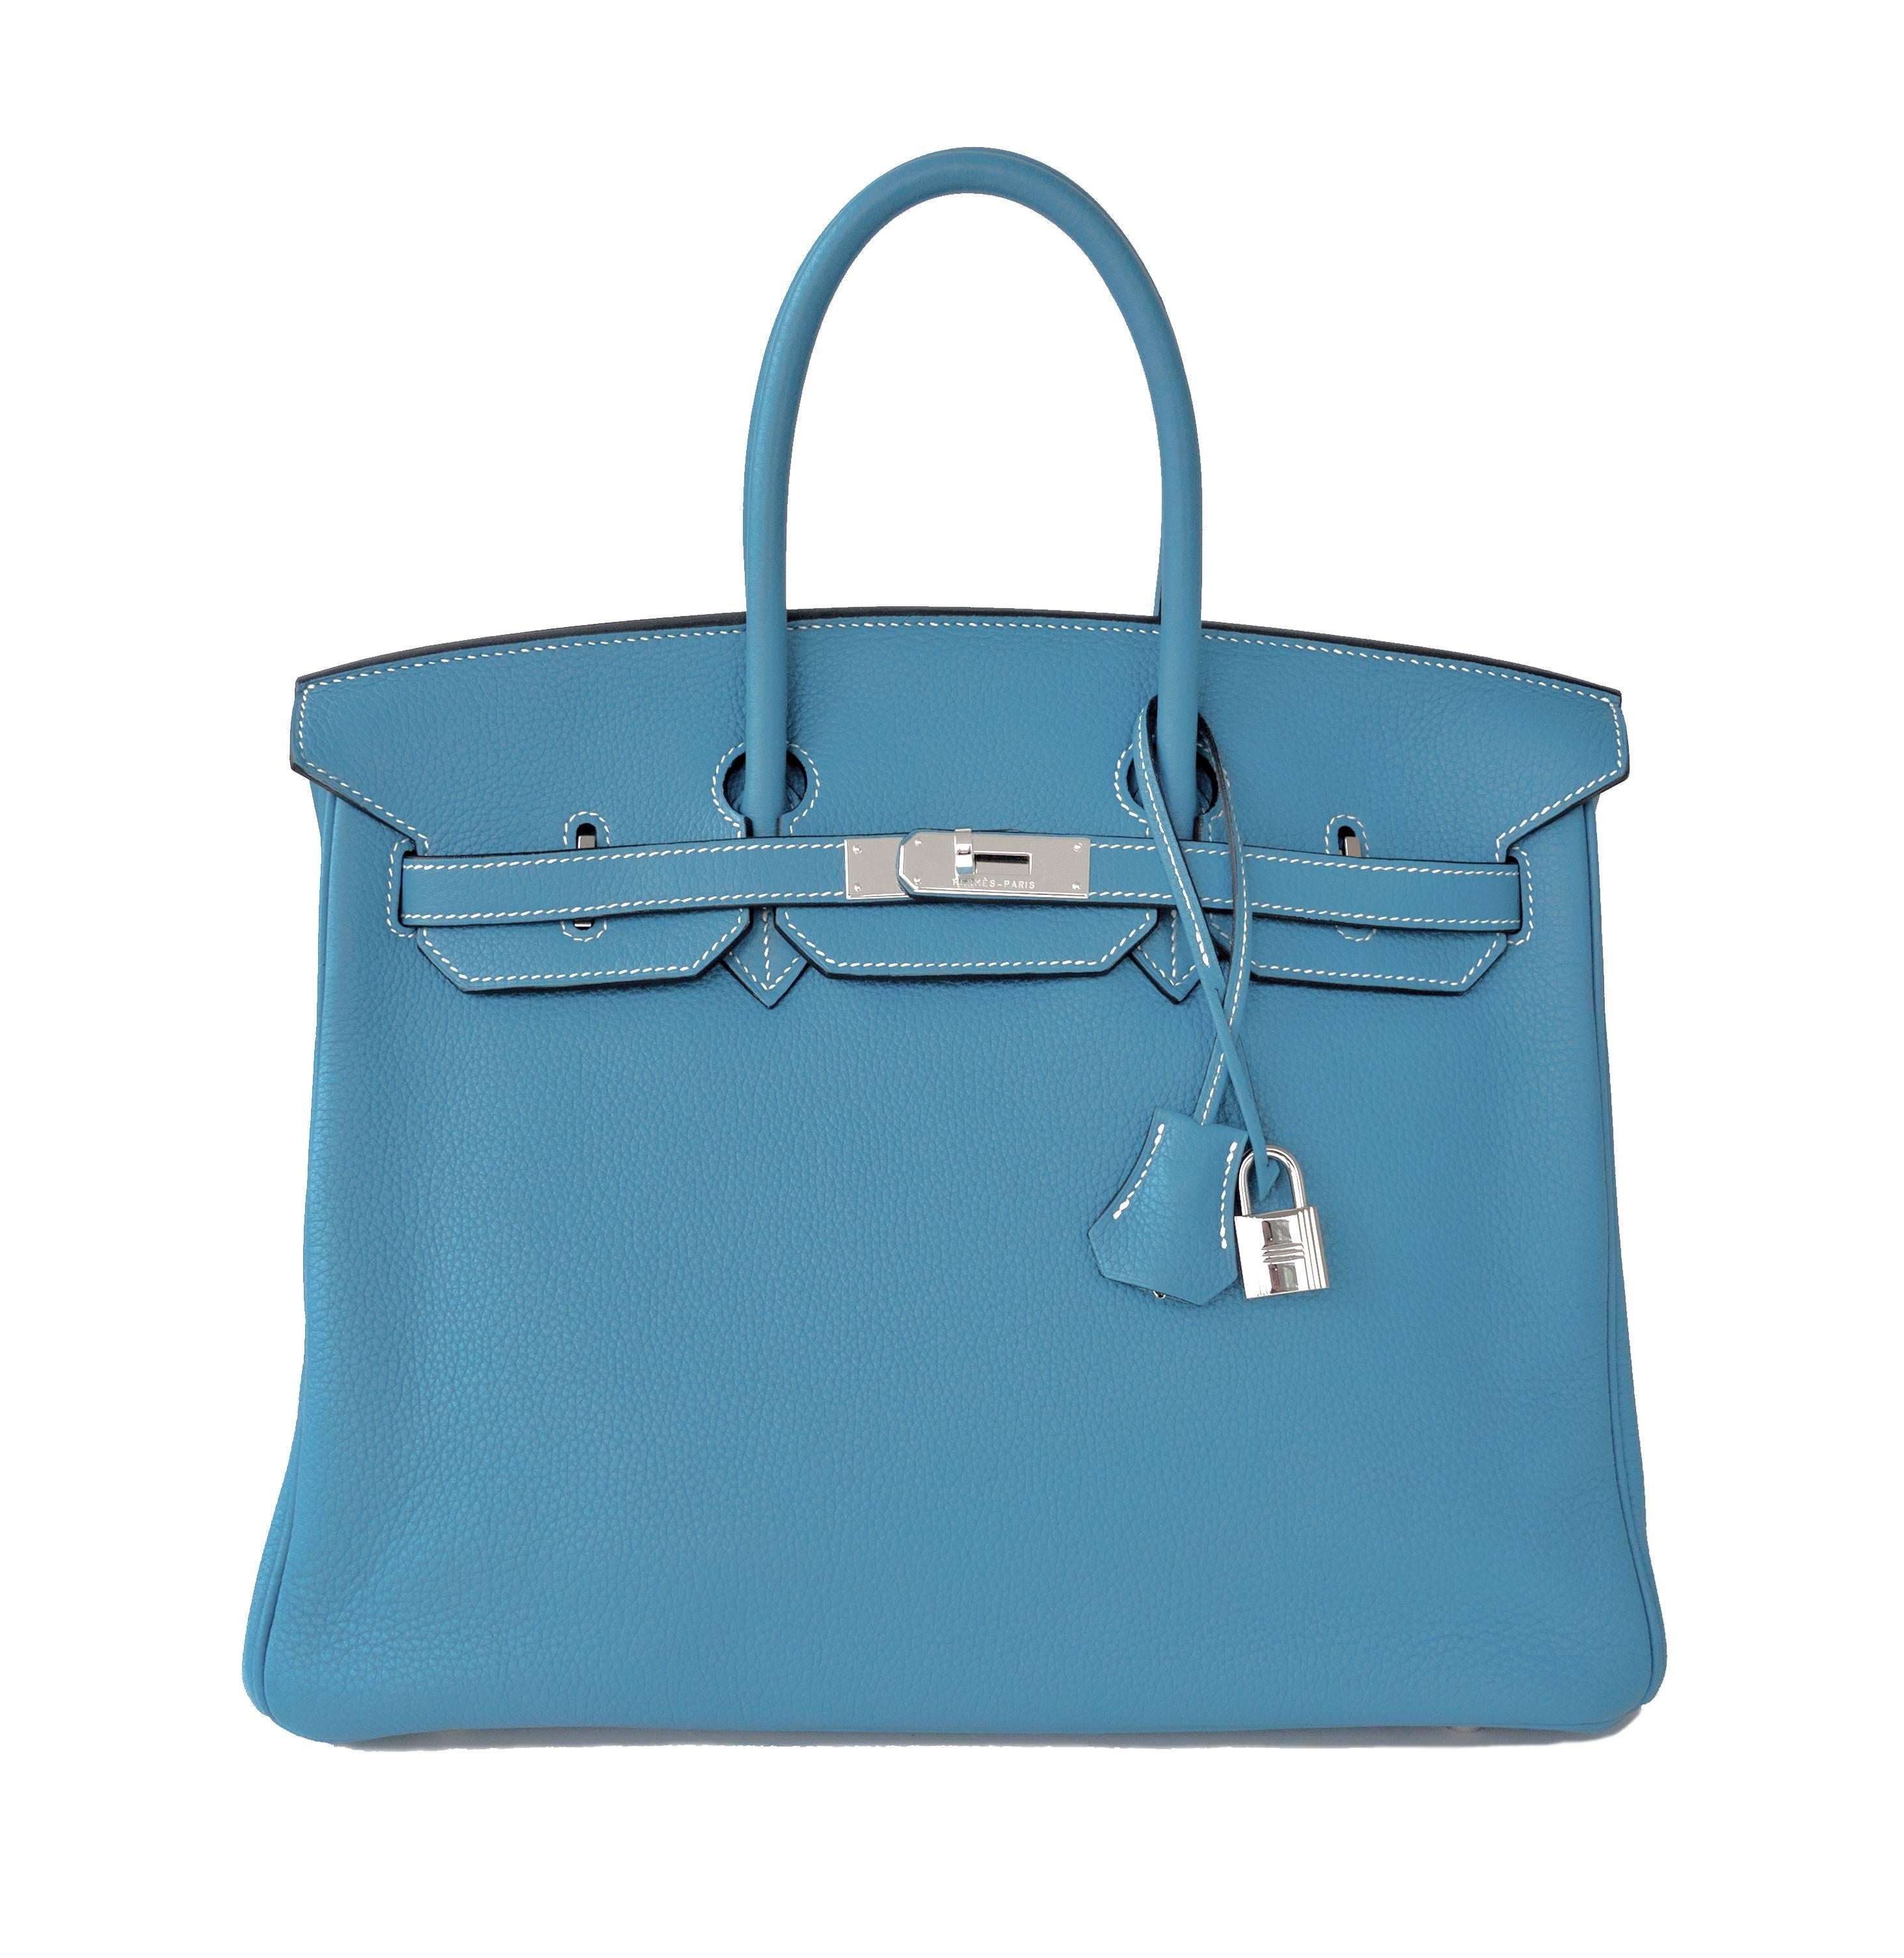 FLASH SALE!  Hermes Blue Jean 35cm Birkin Leather Palladium Bag Summer!
Discontinued Collector's Favorite Blue Jean Birkin is a must-have.
An iconic Hermes color that is both a neutral and color.
Blue Jean is chic and sporty, fabulous with